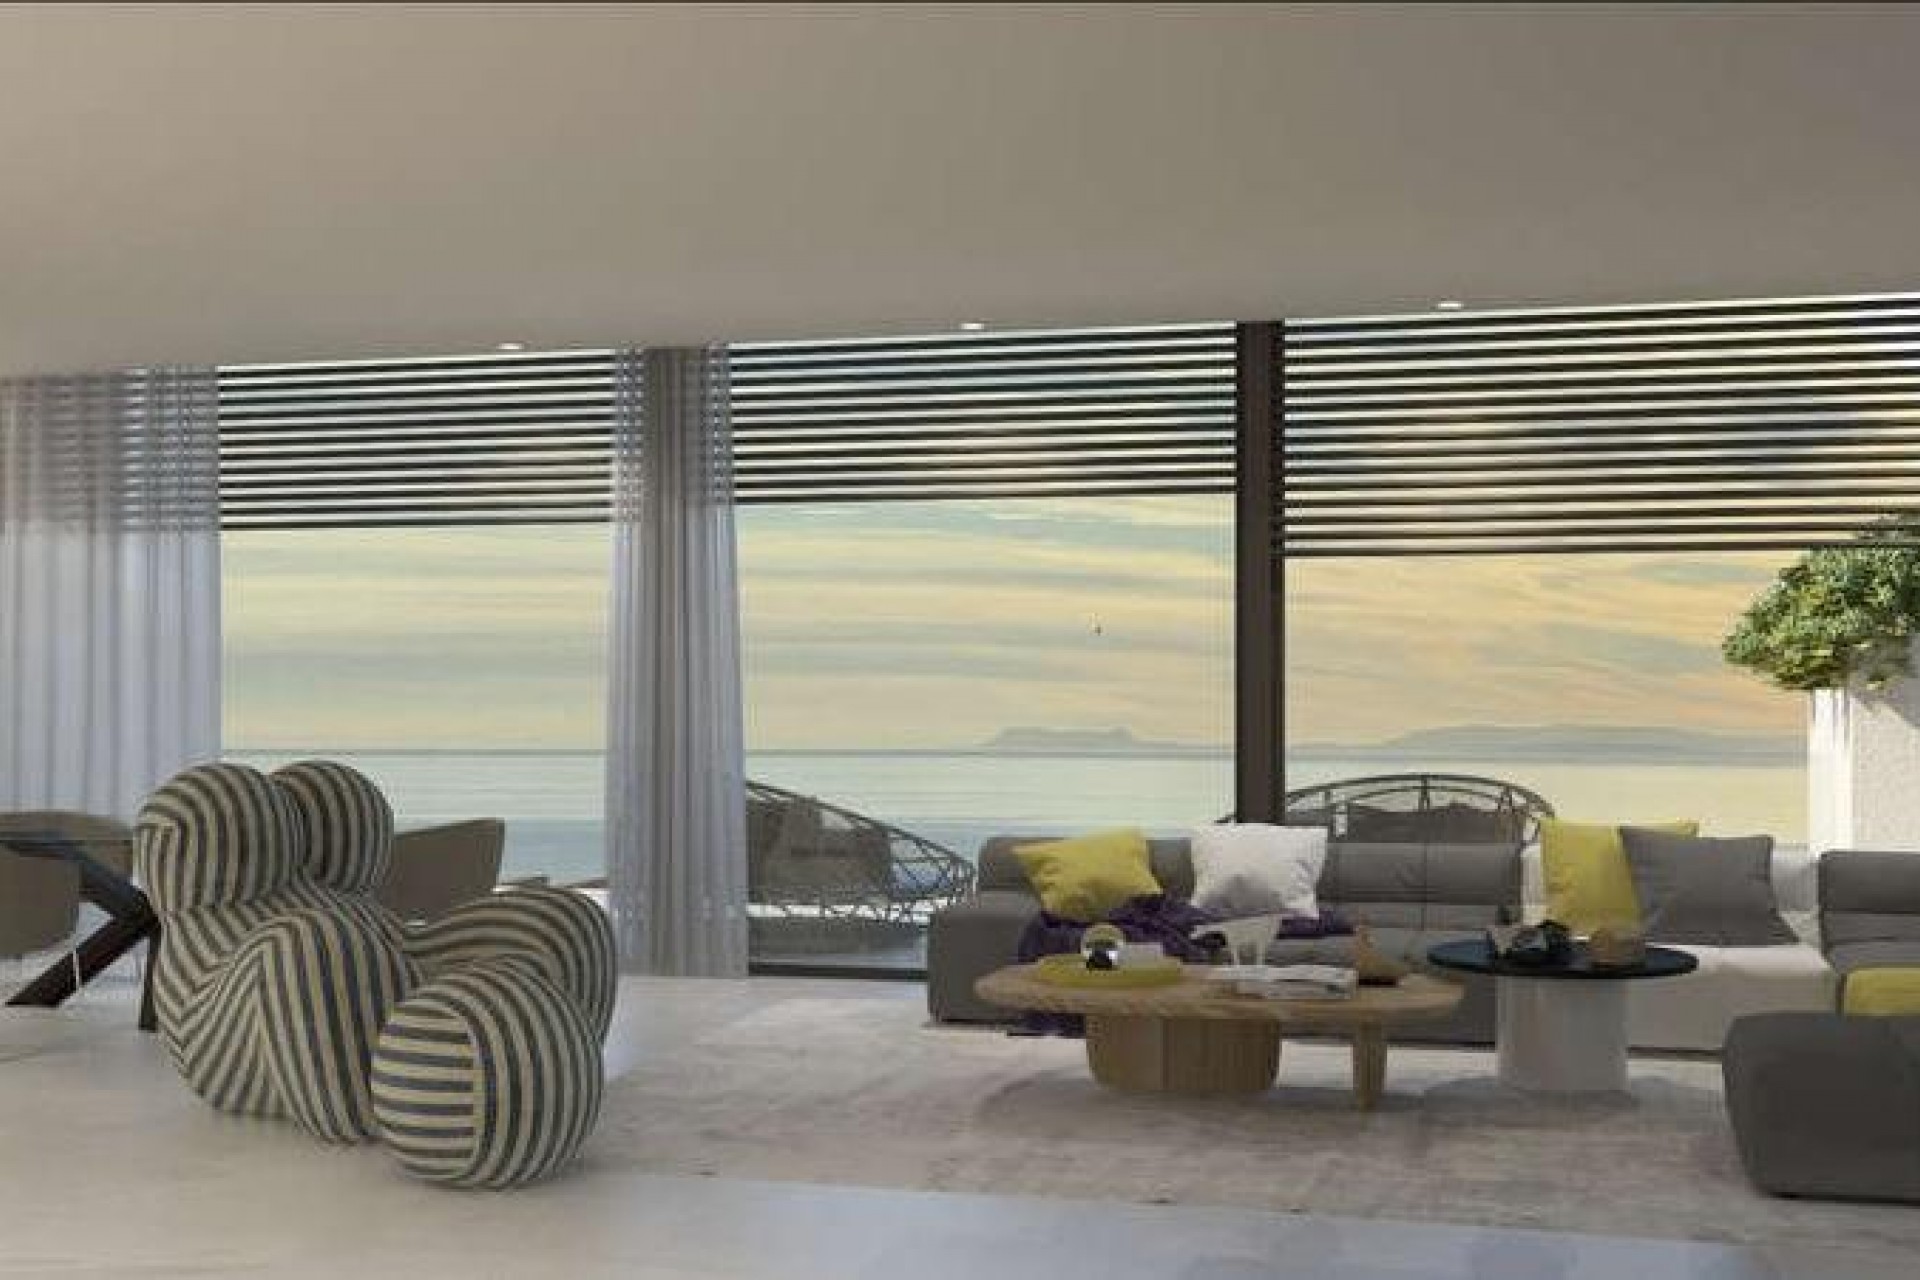 Nouvelle construction - Apartment -
Marbella - Torre Real